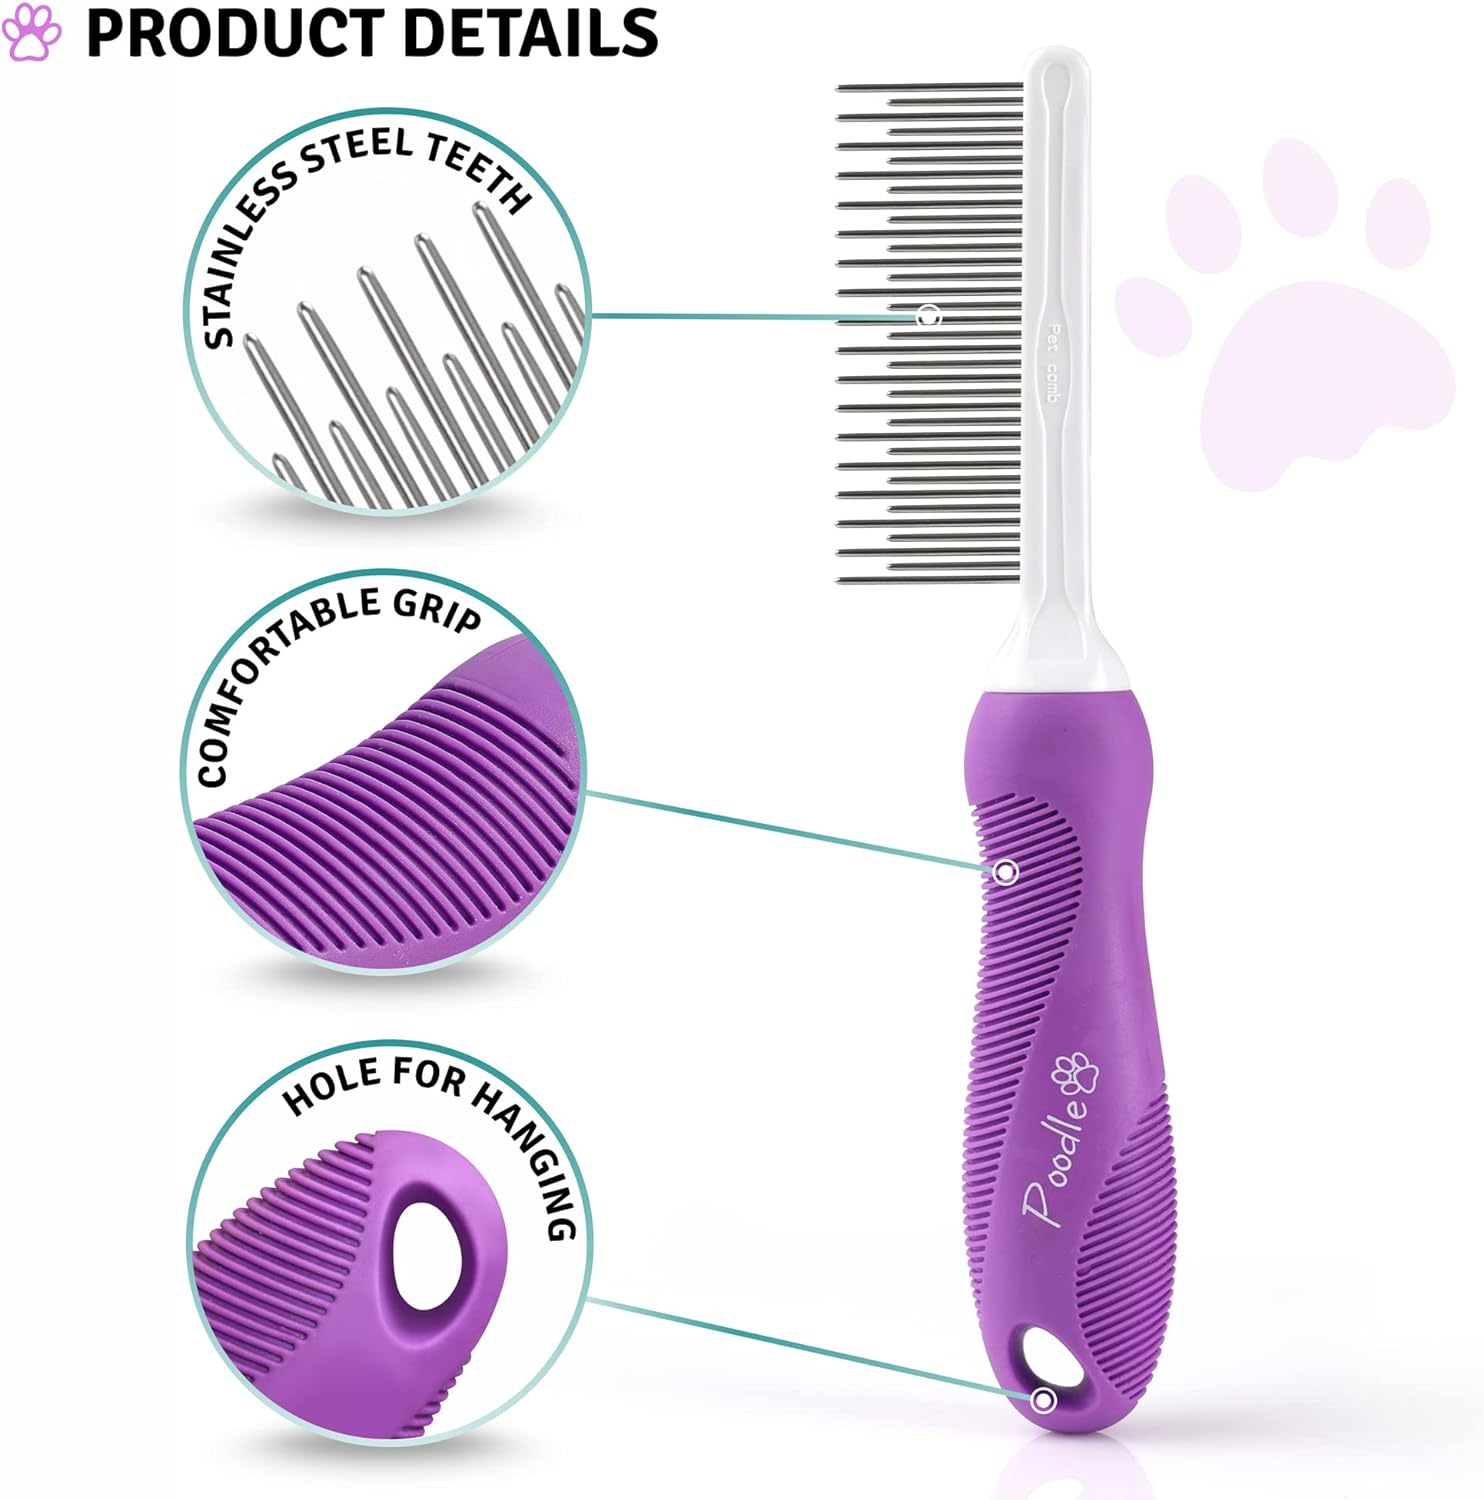 Poodle Pet 2-in-1 Stainless Steel Detangler Comb Cat & Dog Grooming Brush - image 6 of 9